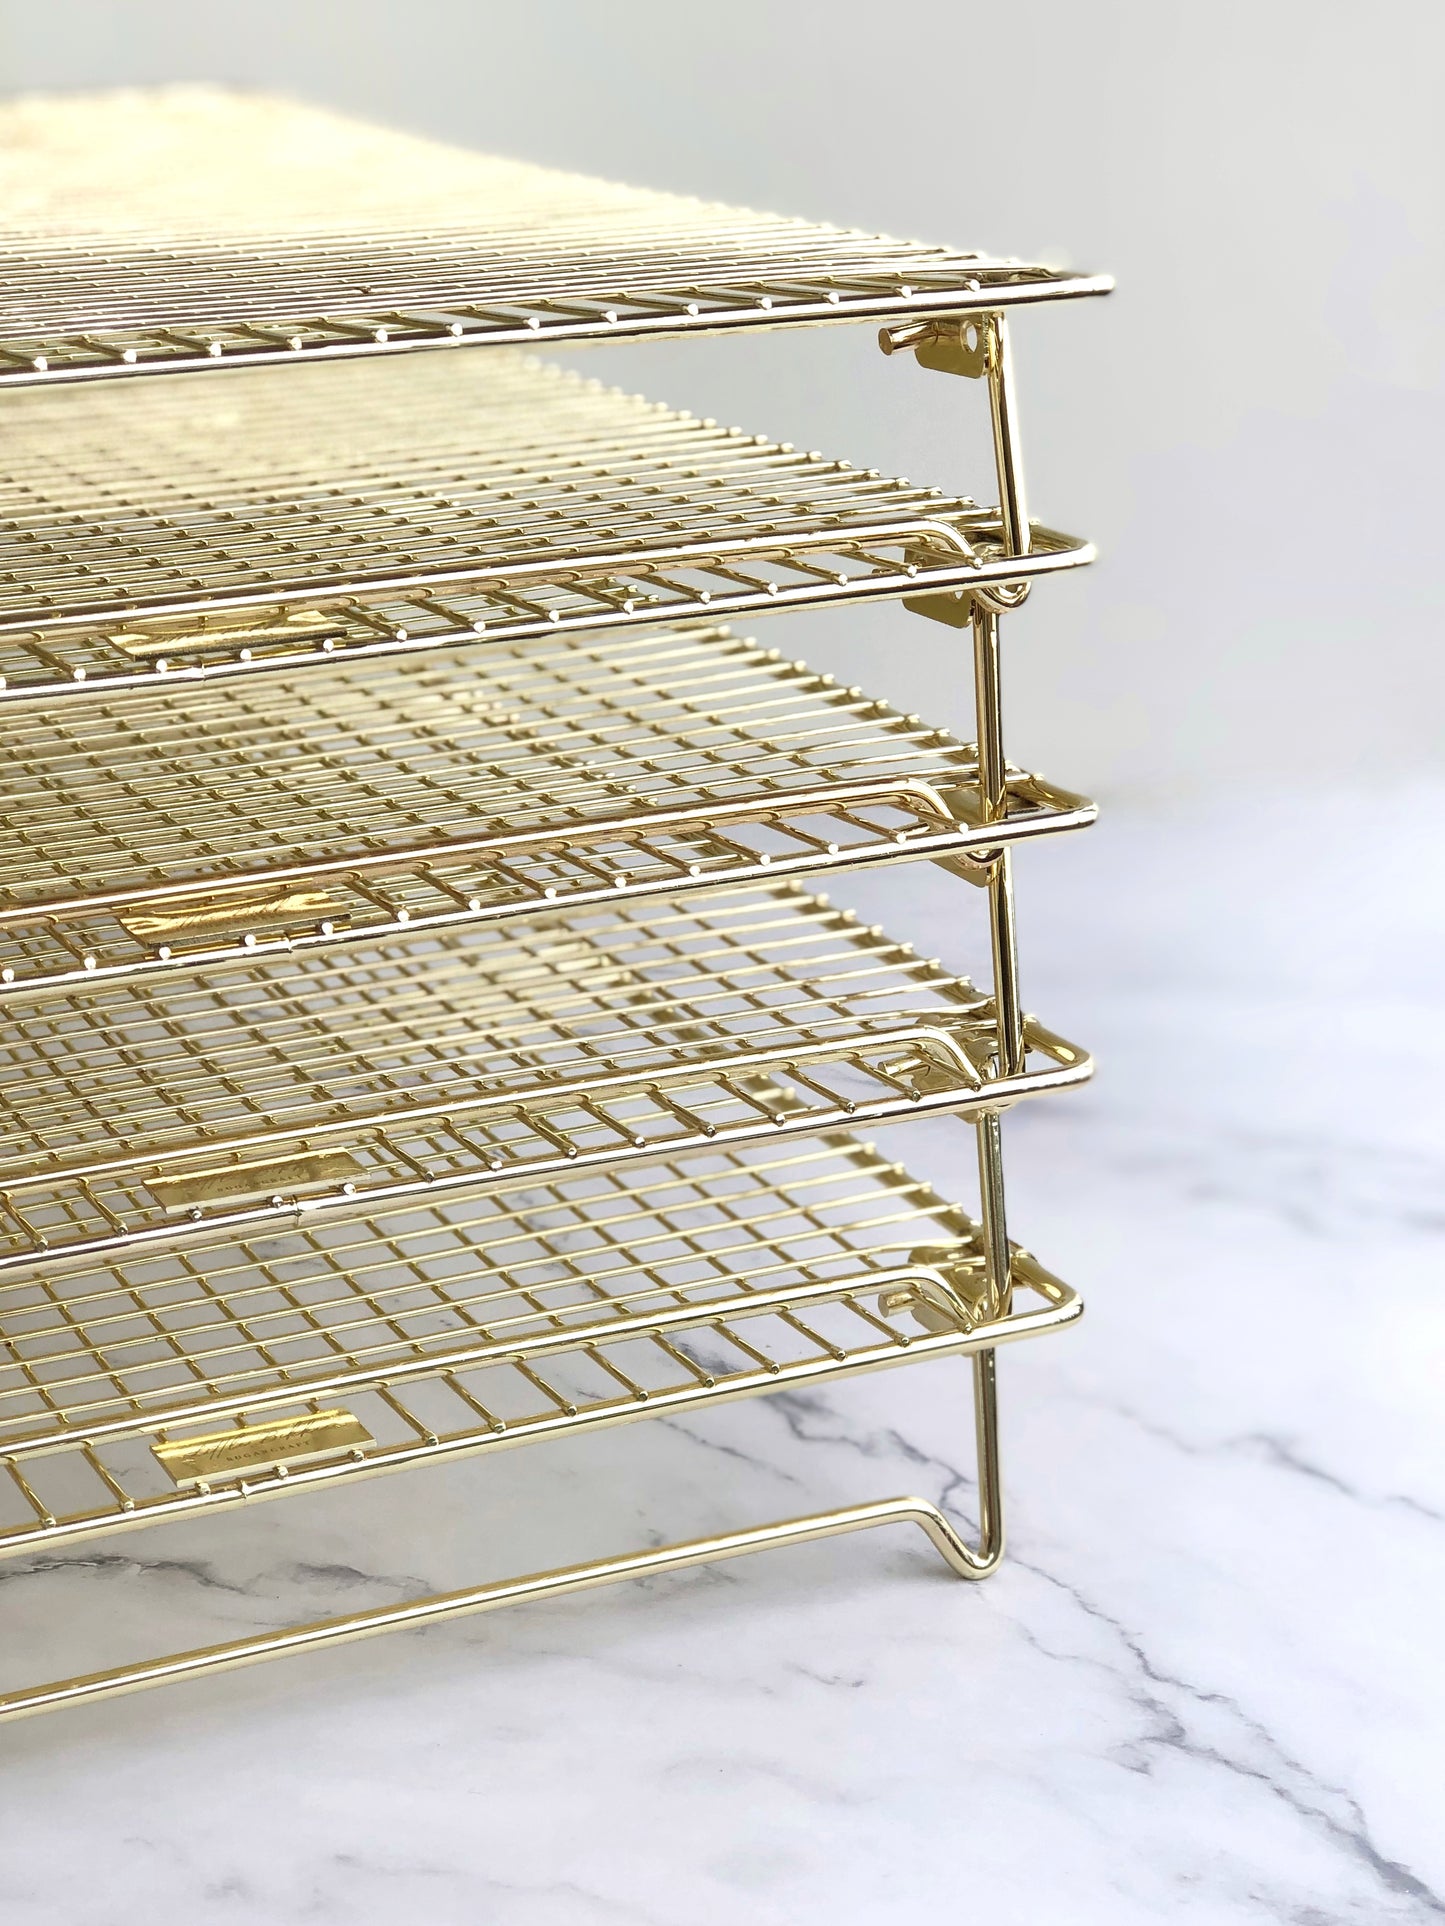 five gold cooling racks stacked on top of each other